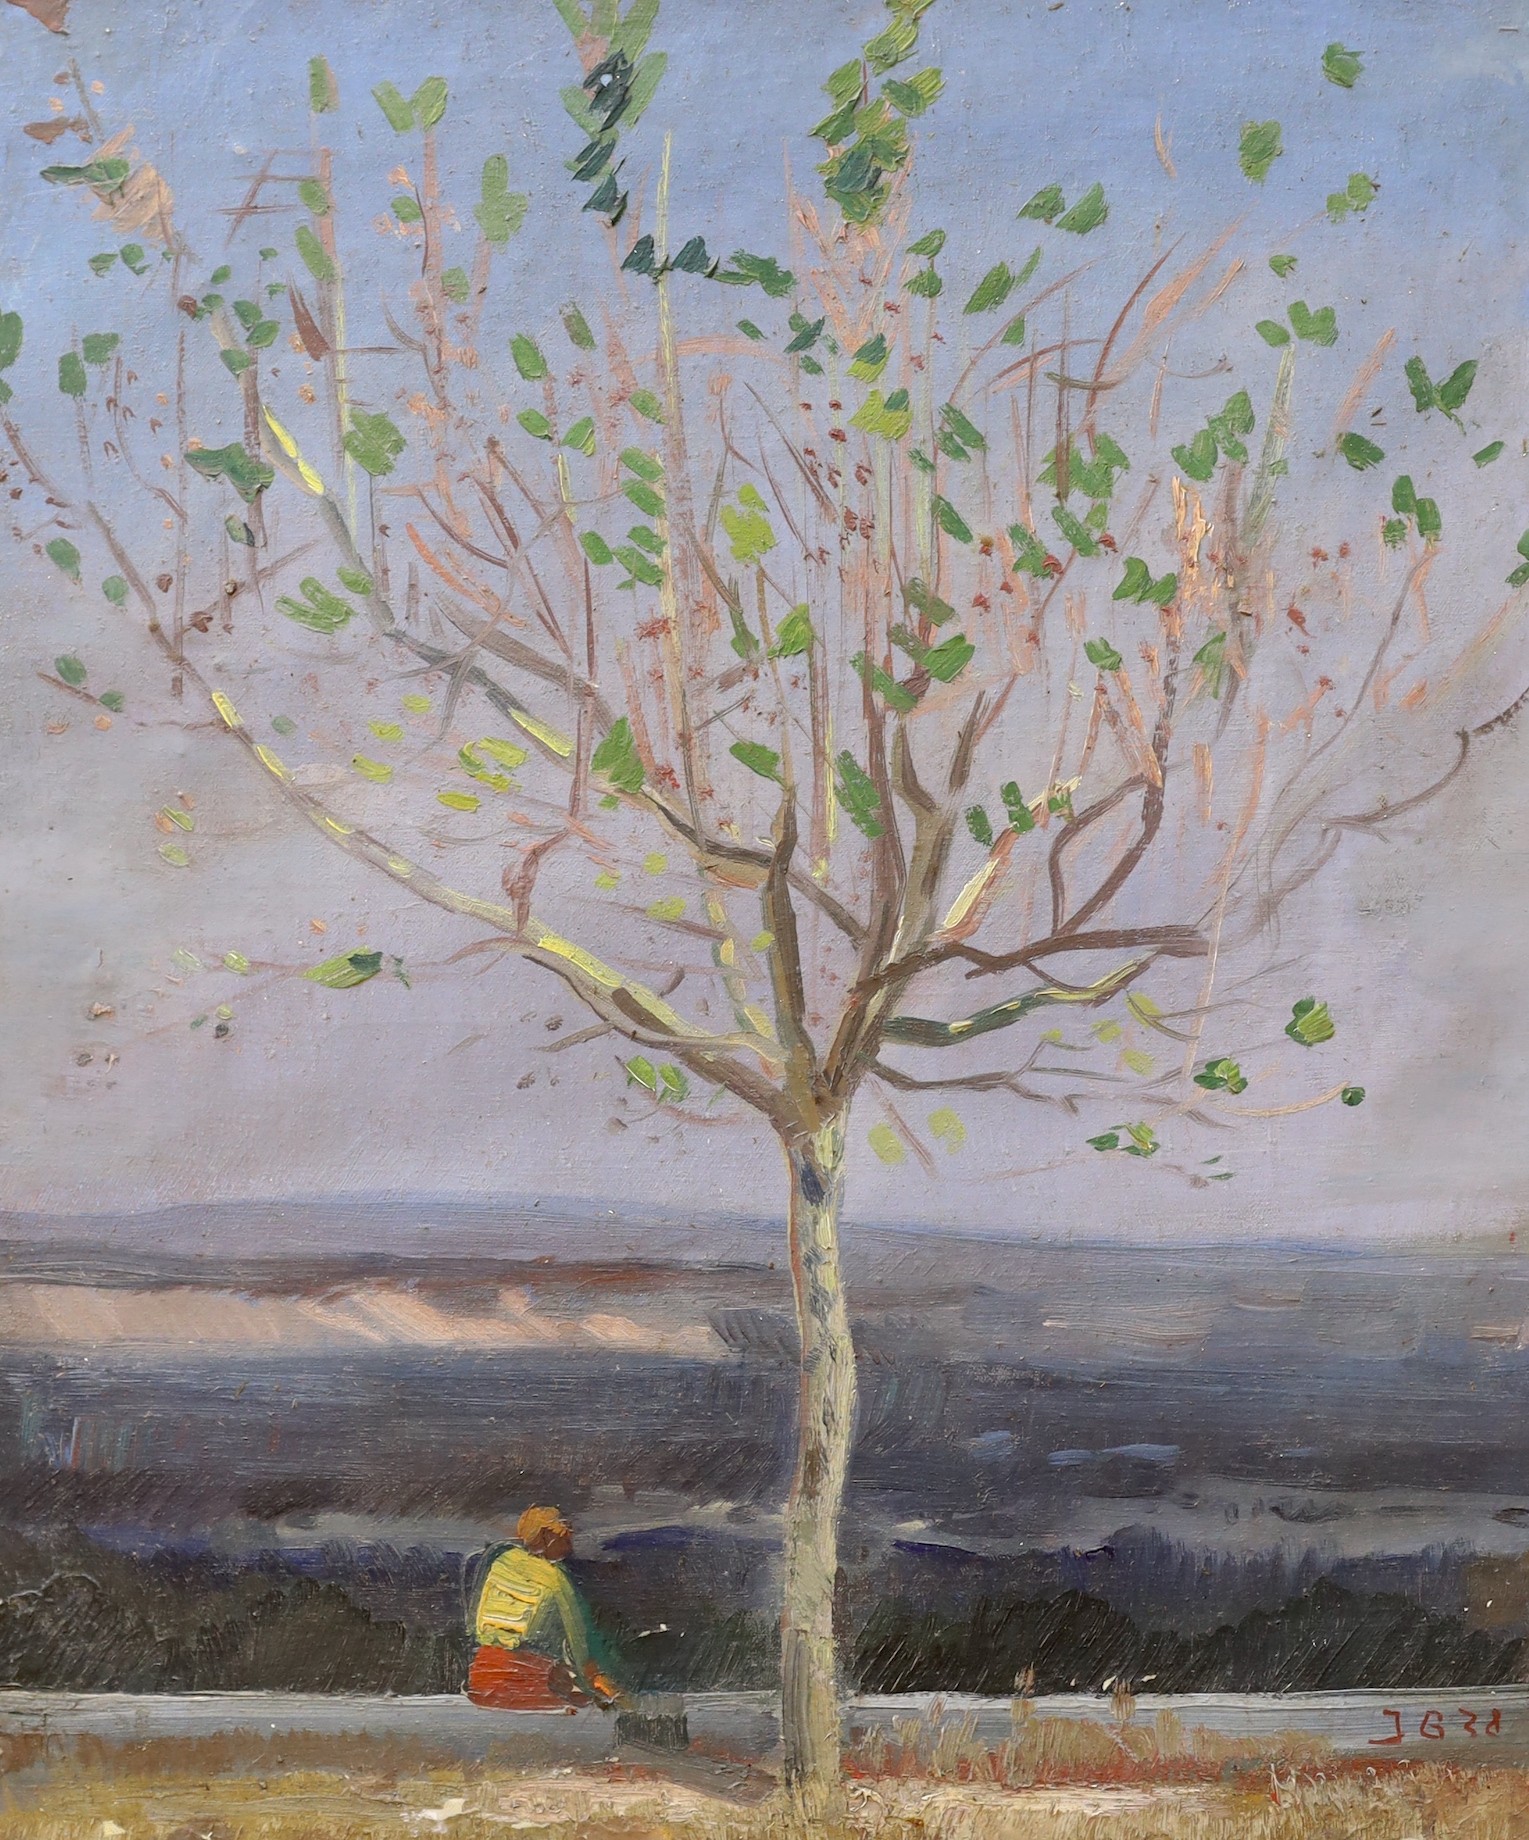 J.G '38, oil on canvas, Landscape with woman seated beneath a tree, initialled and dated '38, 65 x